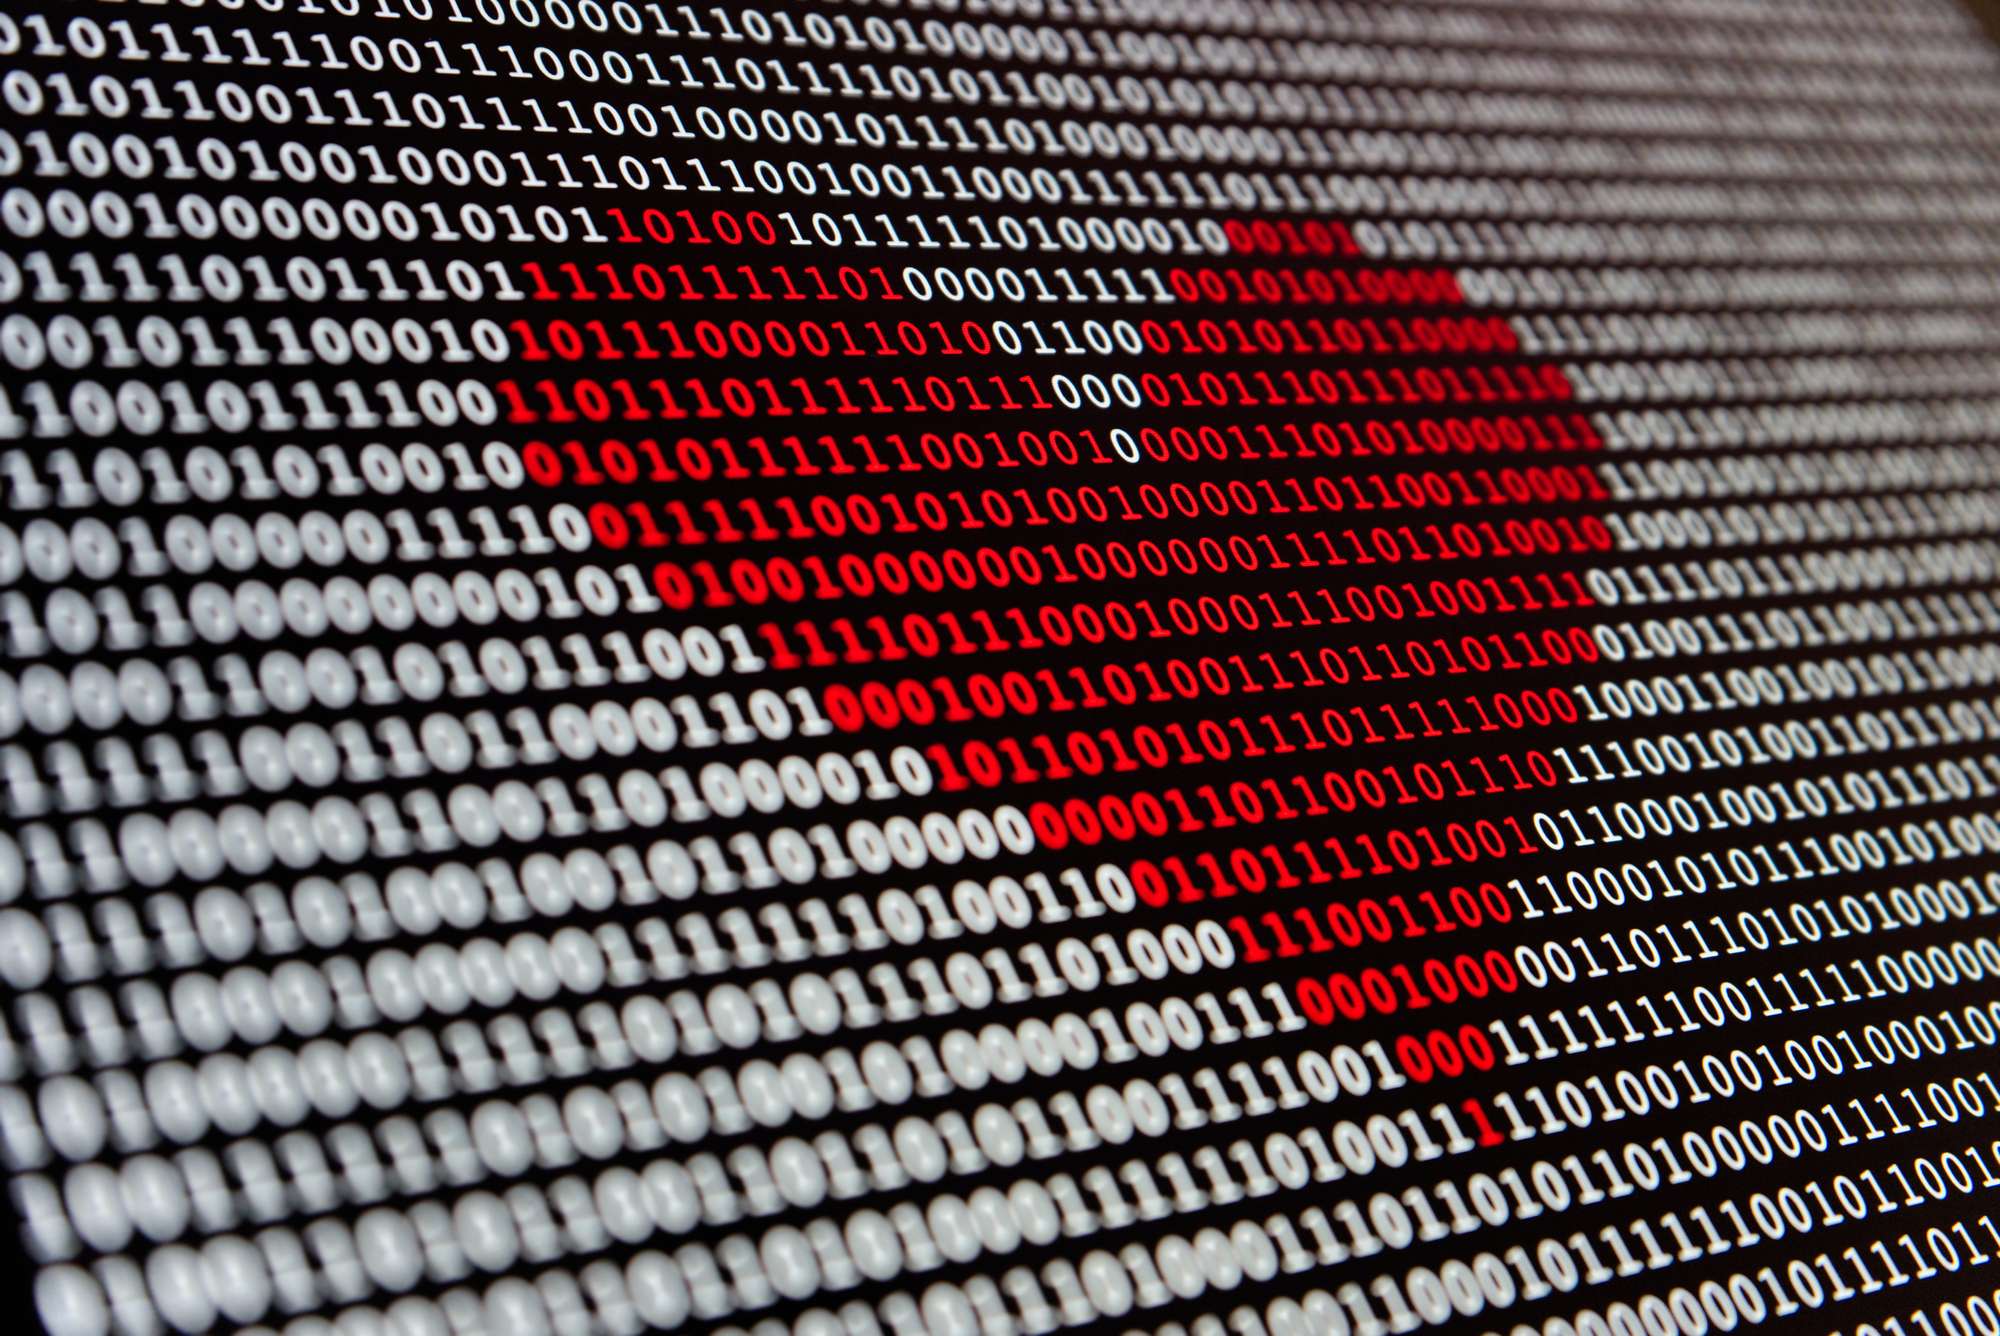 An angled photo of a surface (a screen?) that shows white and red 0s and 1s on black with the digits strategically colored so the red ones form a heart